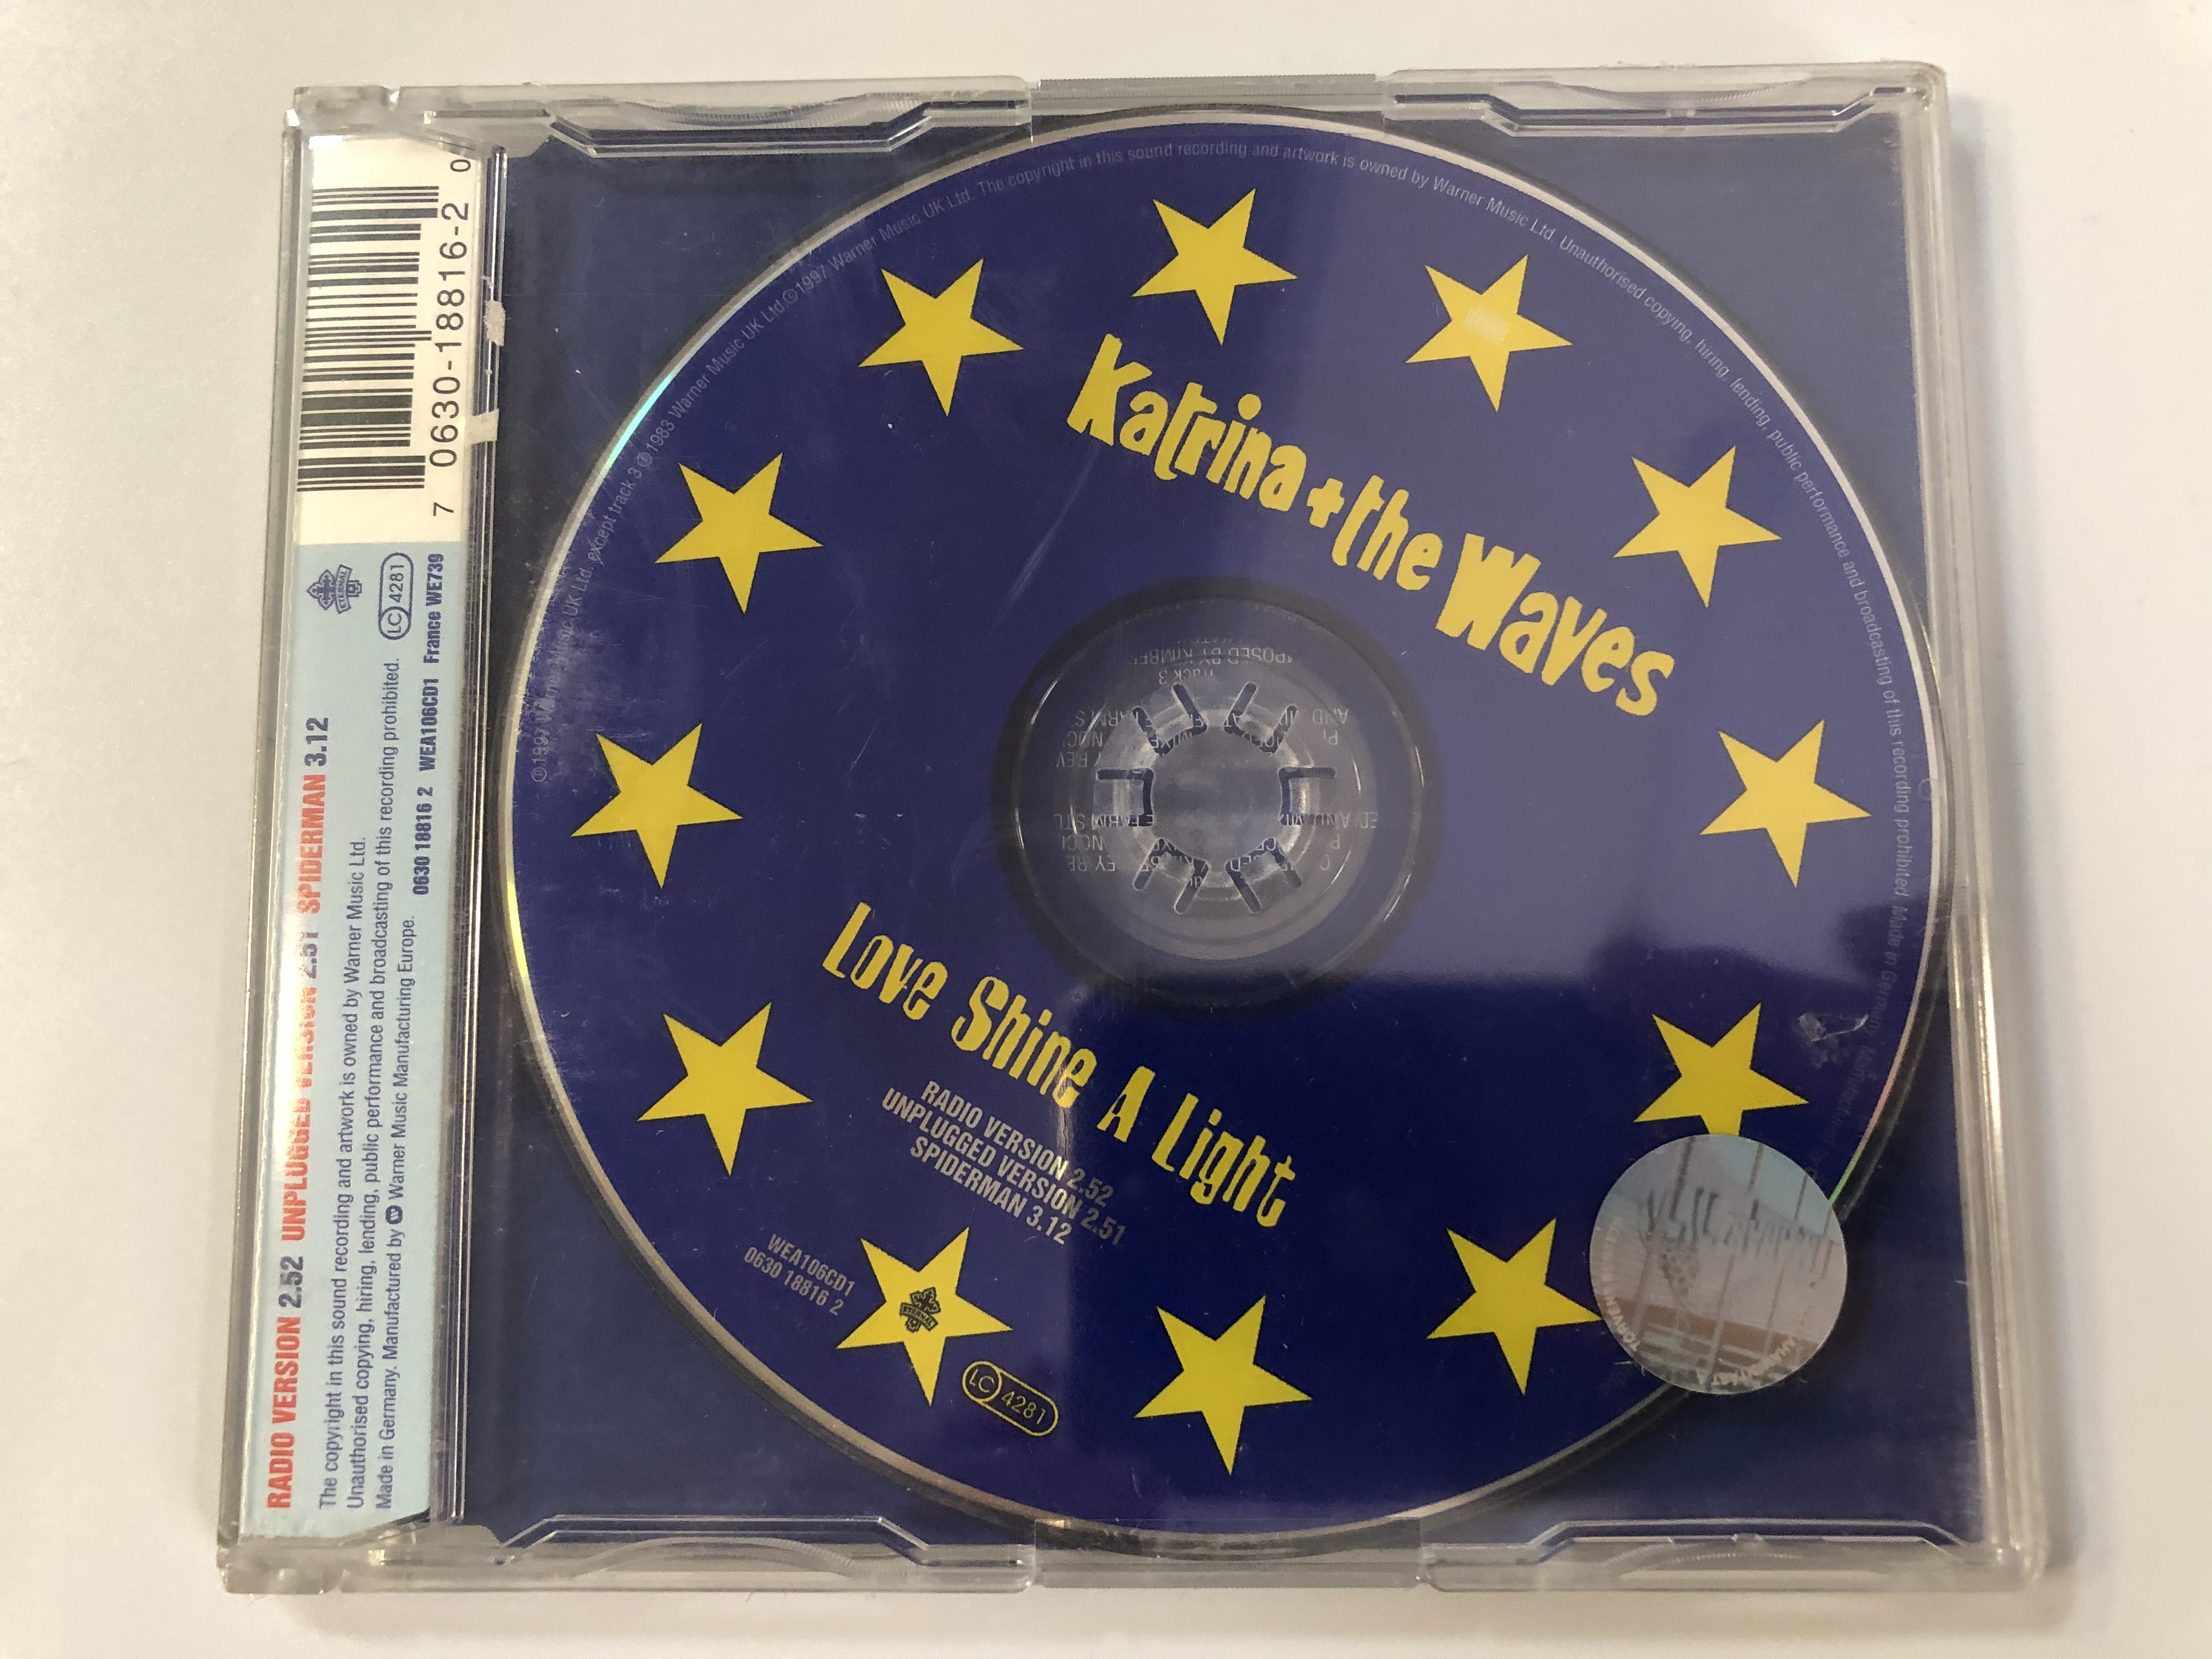 katrina-the-waves-love-shine-a-light-britains-official-entry-to-the-1997-eurovision-song-contest-eternal-audio-cd-0630-18816-2-2-.jpg